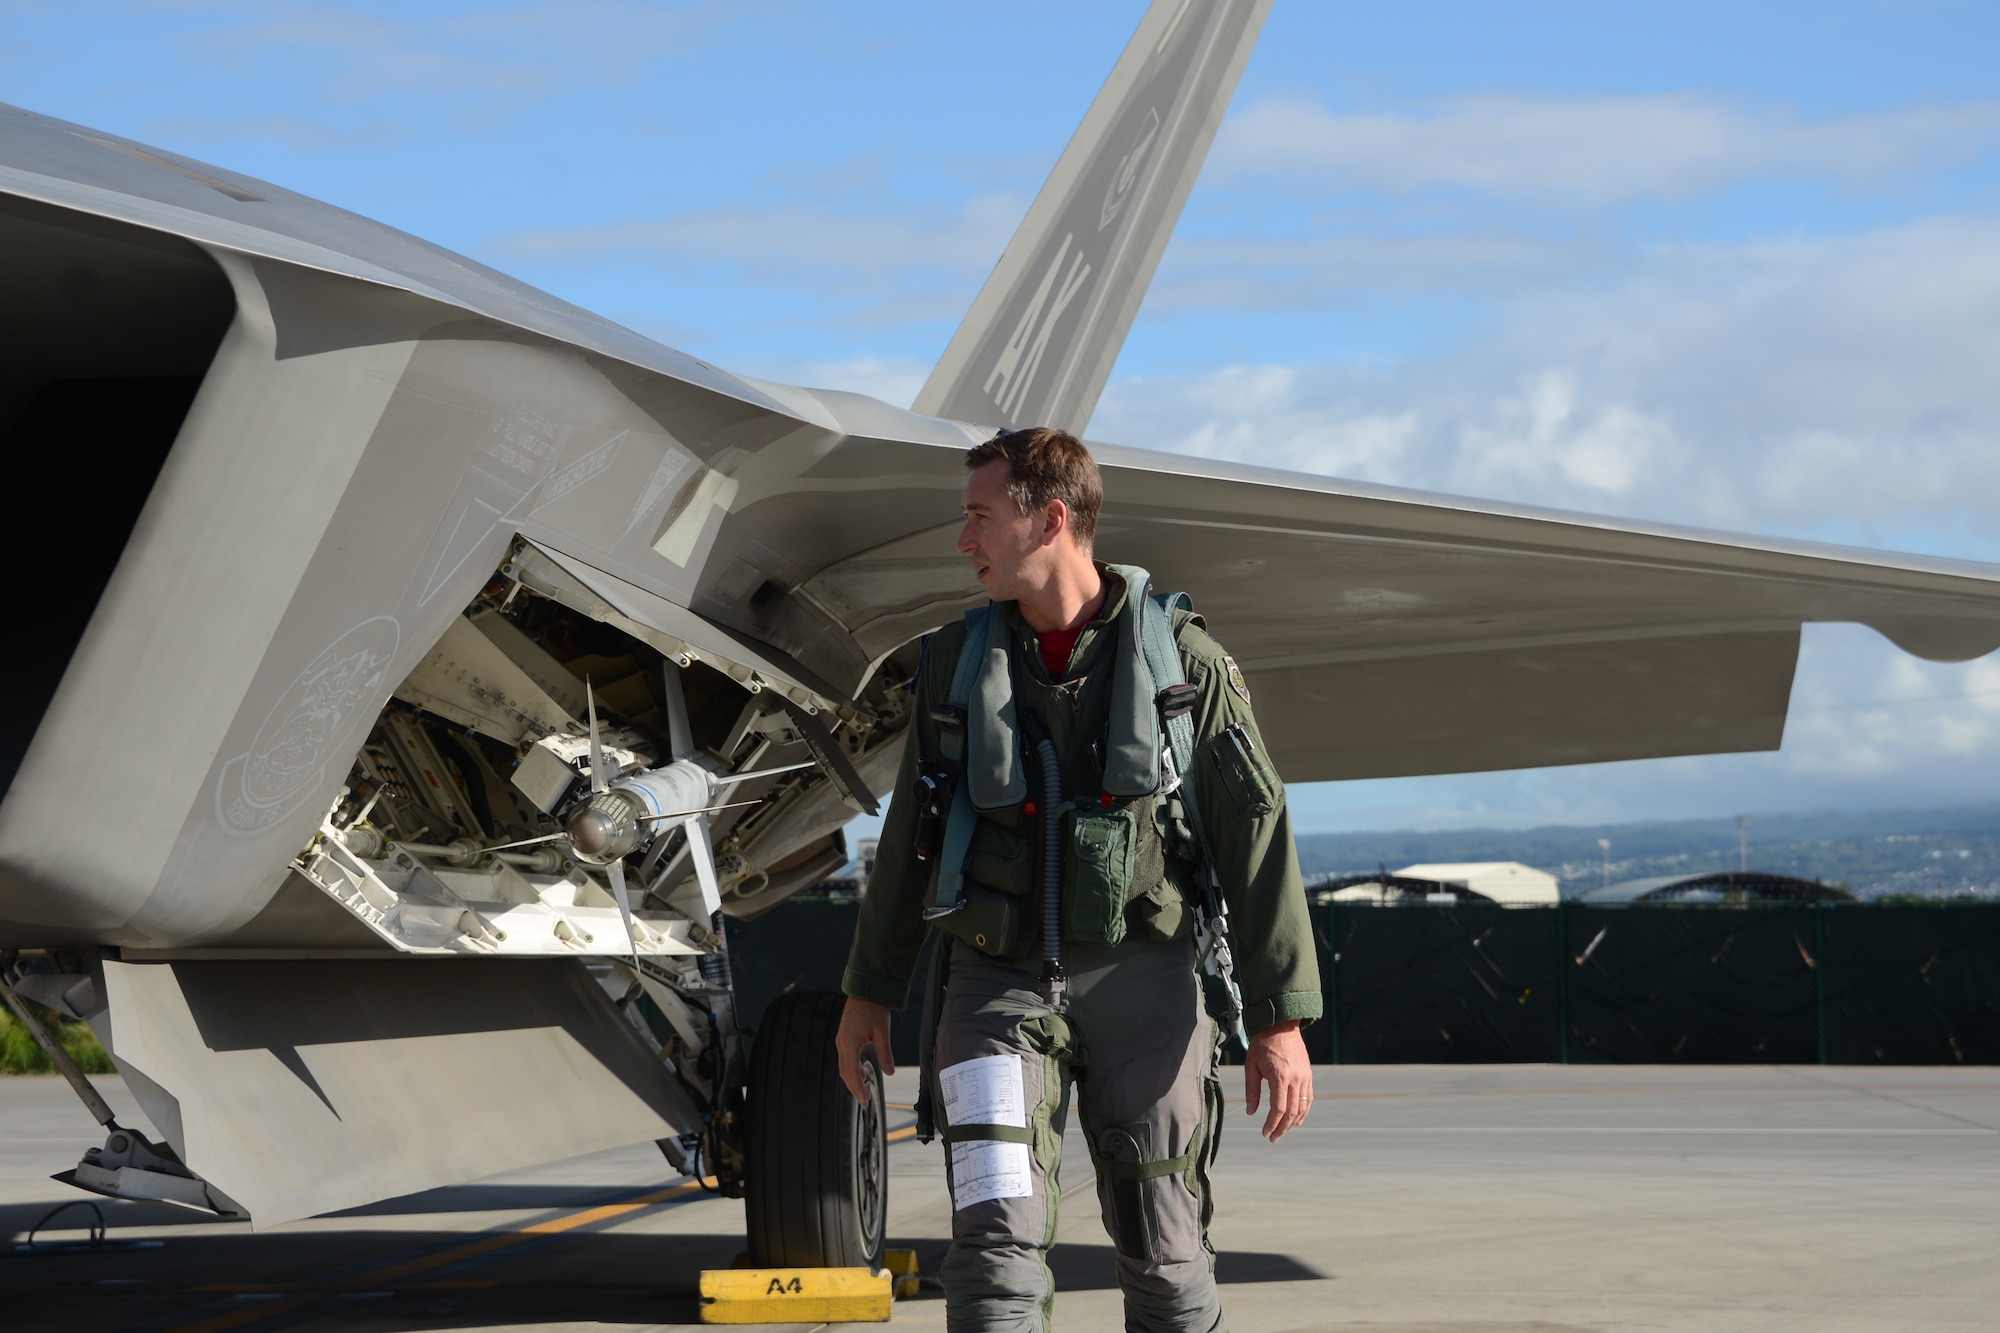 Lt. Col. Chad Feucht, a Reserve F-22 pilot, conducts his final walk around inspection prior to his sortie Sept 6, 2014. The 477th Fighter Group is Alaska's only Air Force Reserve unit and has just returned from its first ever group-wide off station annual tour at Joint Base Pearl Harbor Hickam, Hawaii. (U.S. Air Force photo/Tech. Sgt. Dana Rosso)
